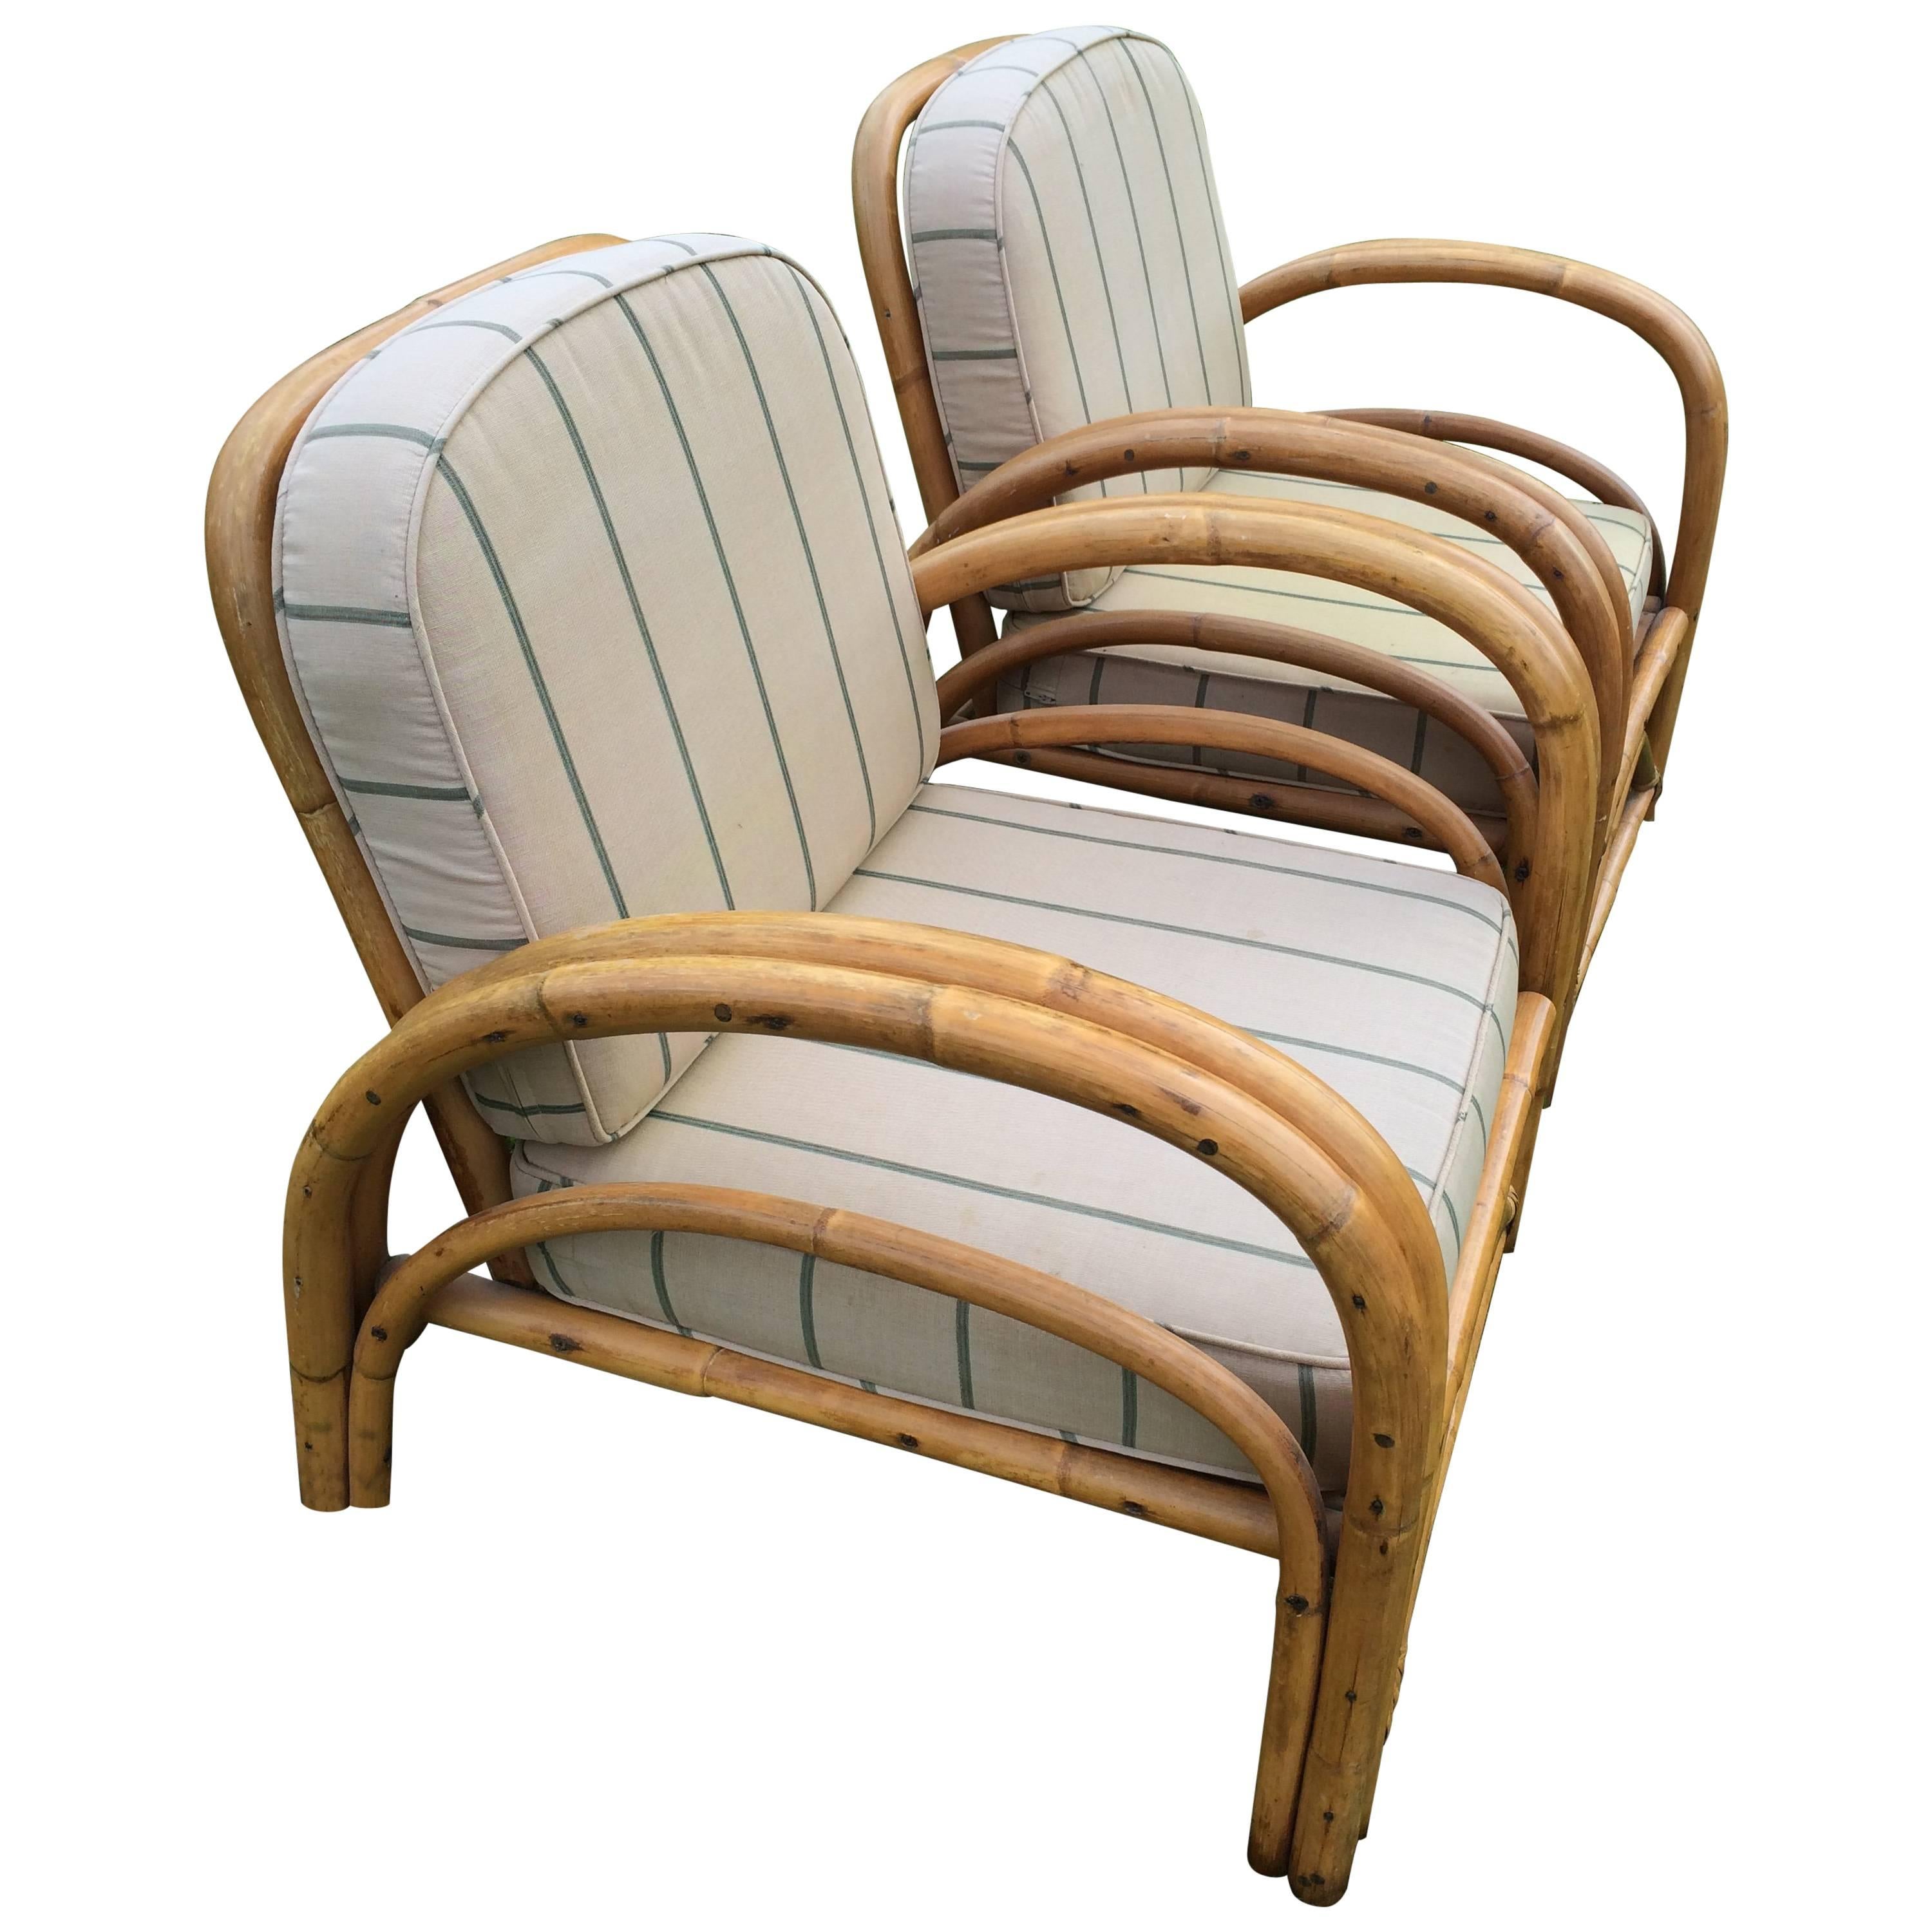 Pair of Rattan Lounge Chairs in the style of Paul Frankl 